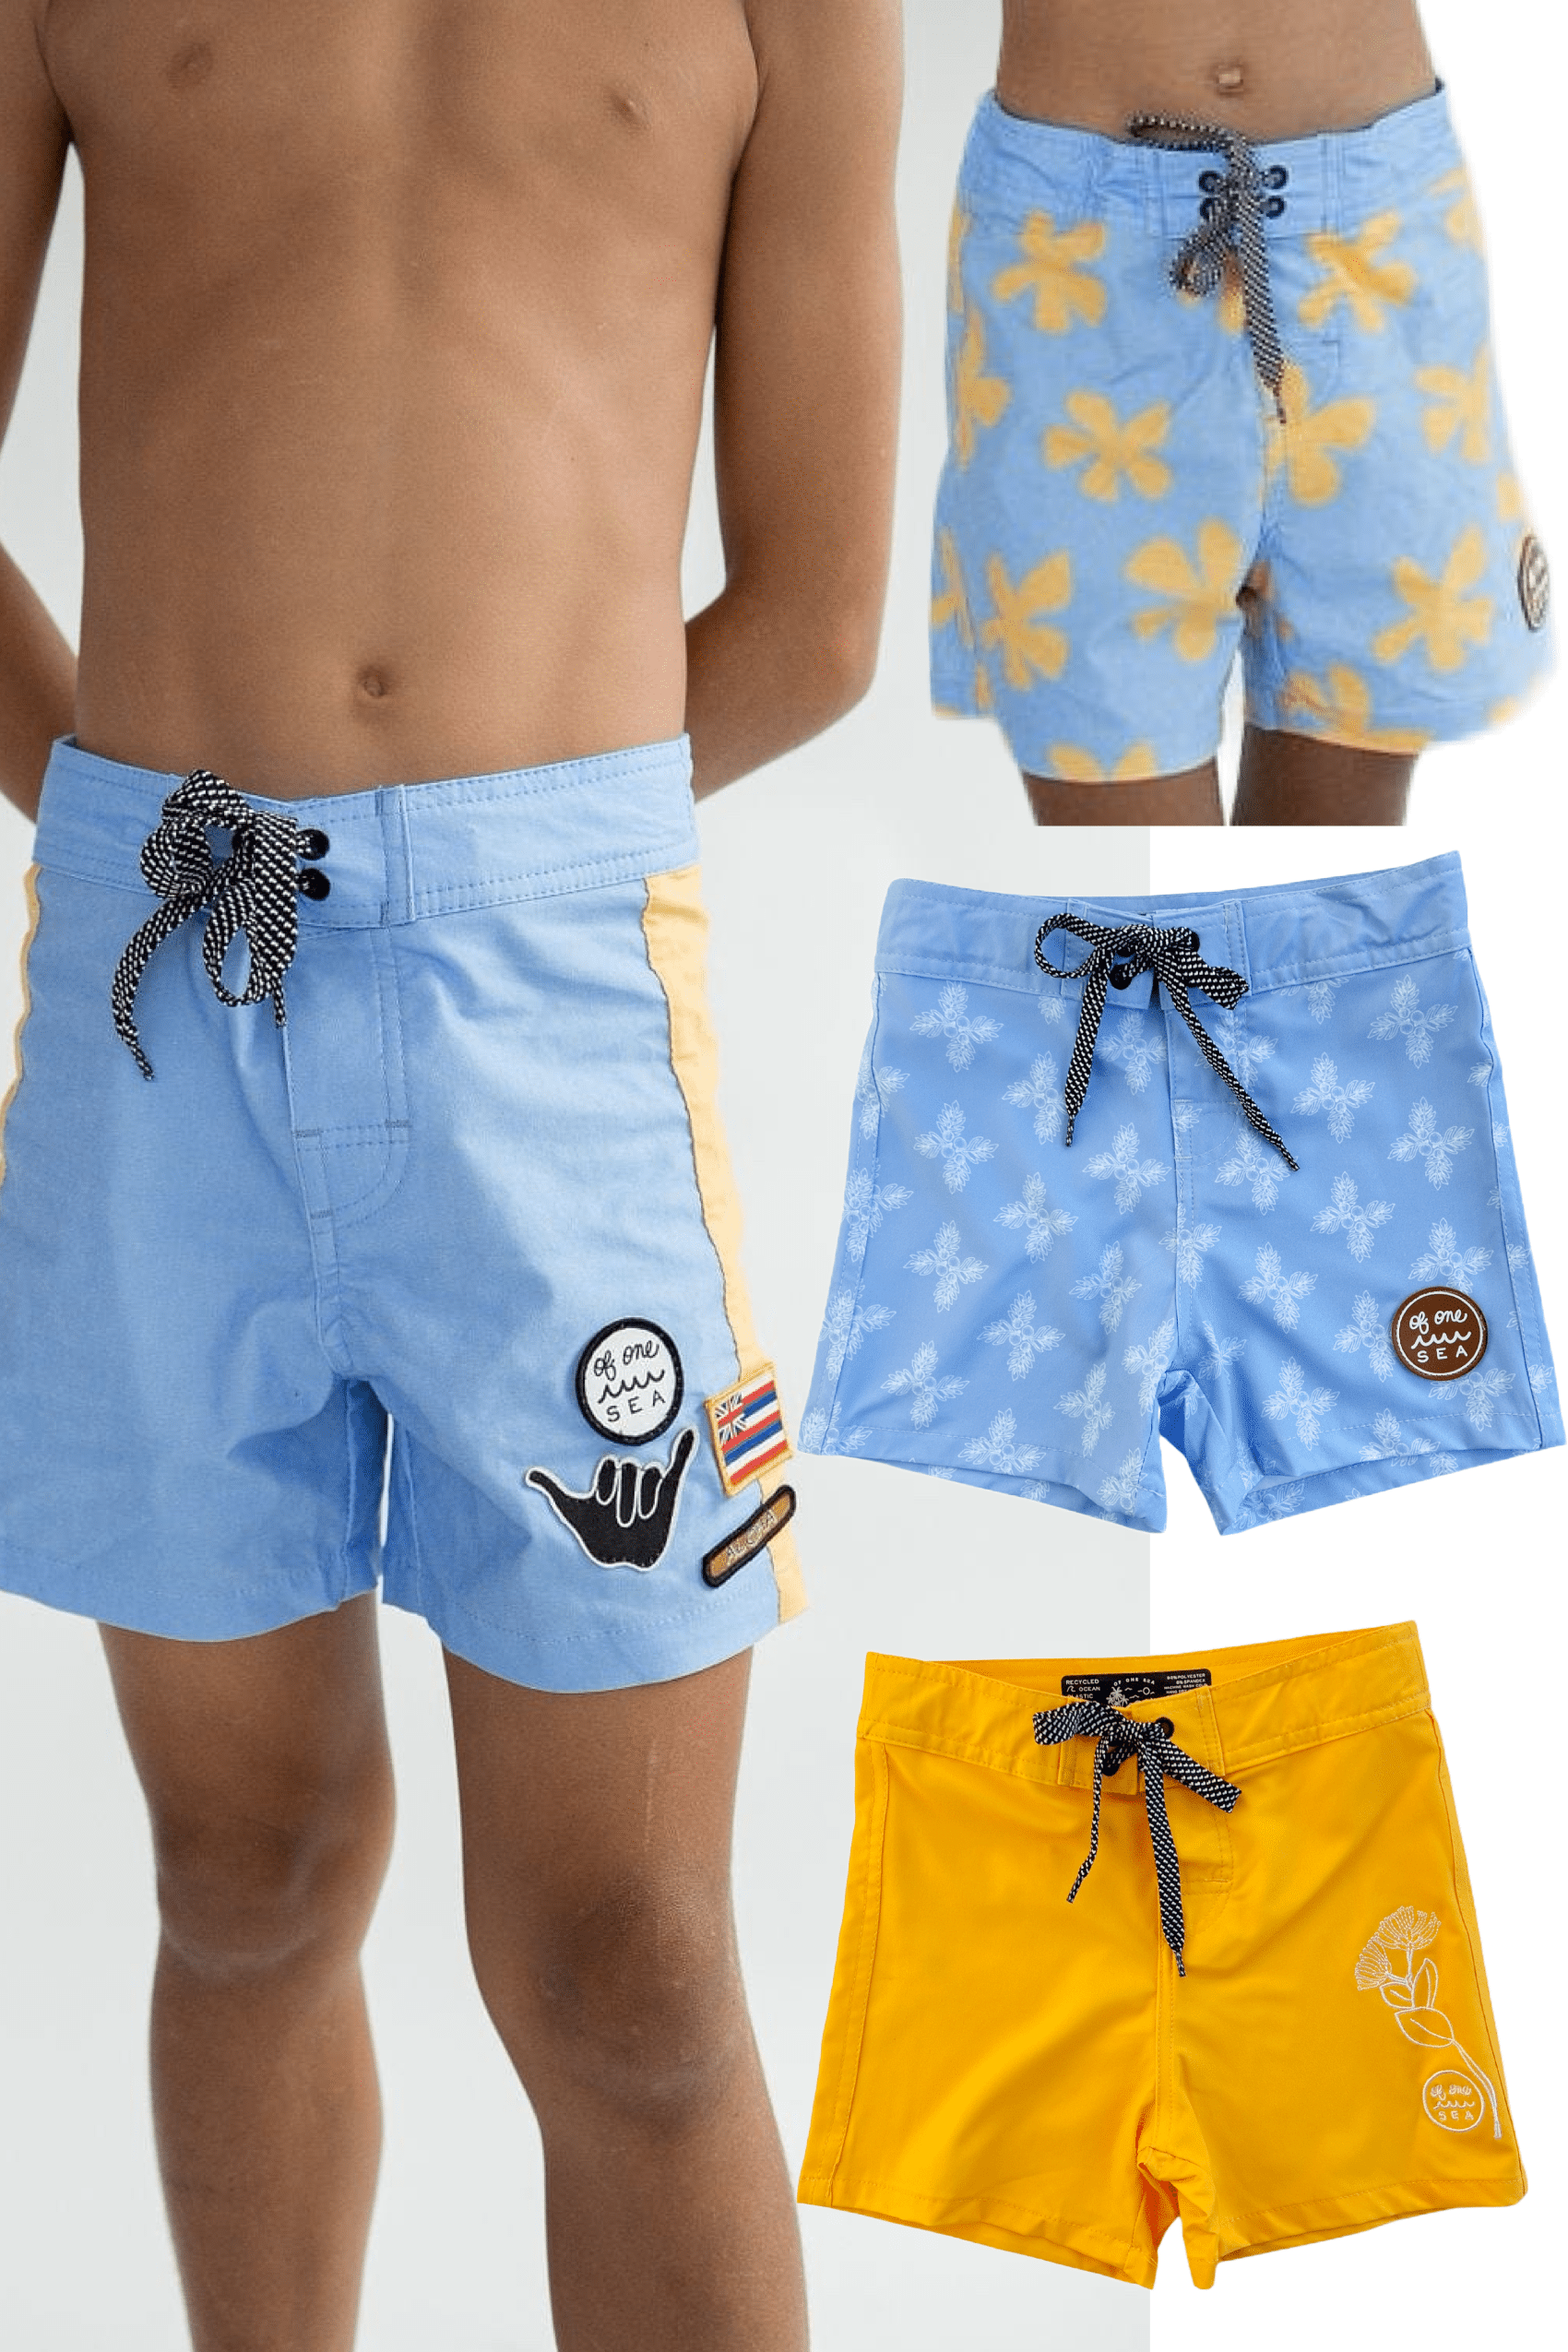 Boy's Youth Boardshort Bundle in Blue and Yellow